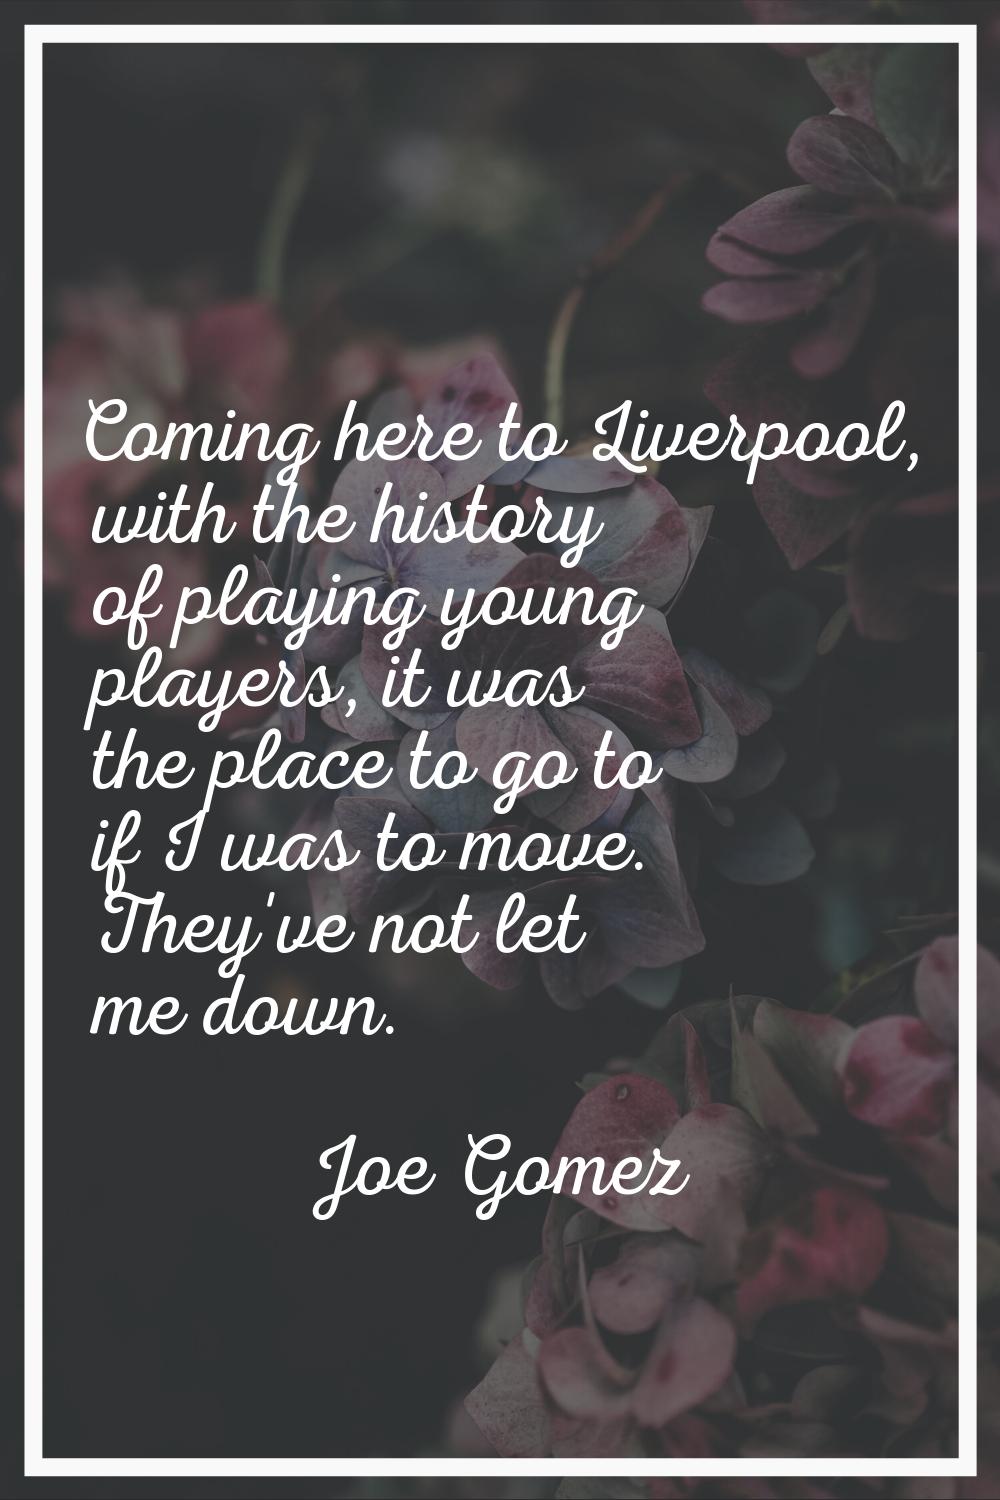 Coming here to Liverpool, with the history of playing young players, it was the place to go to if I